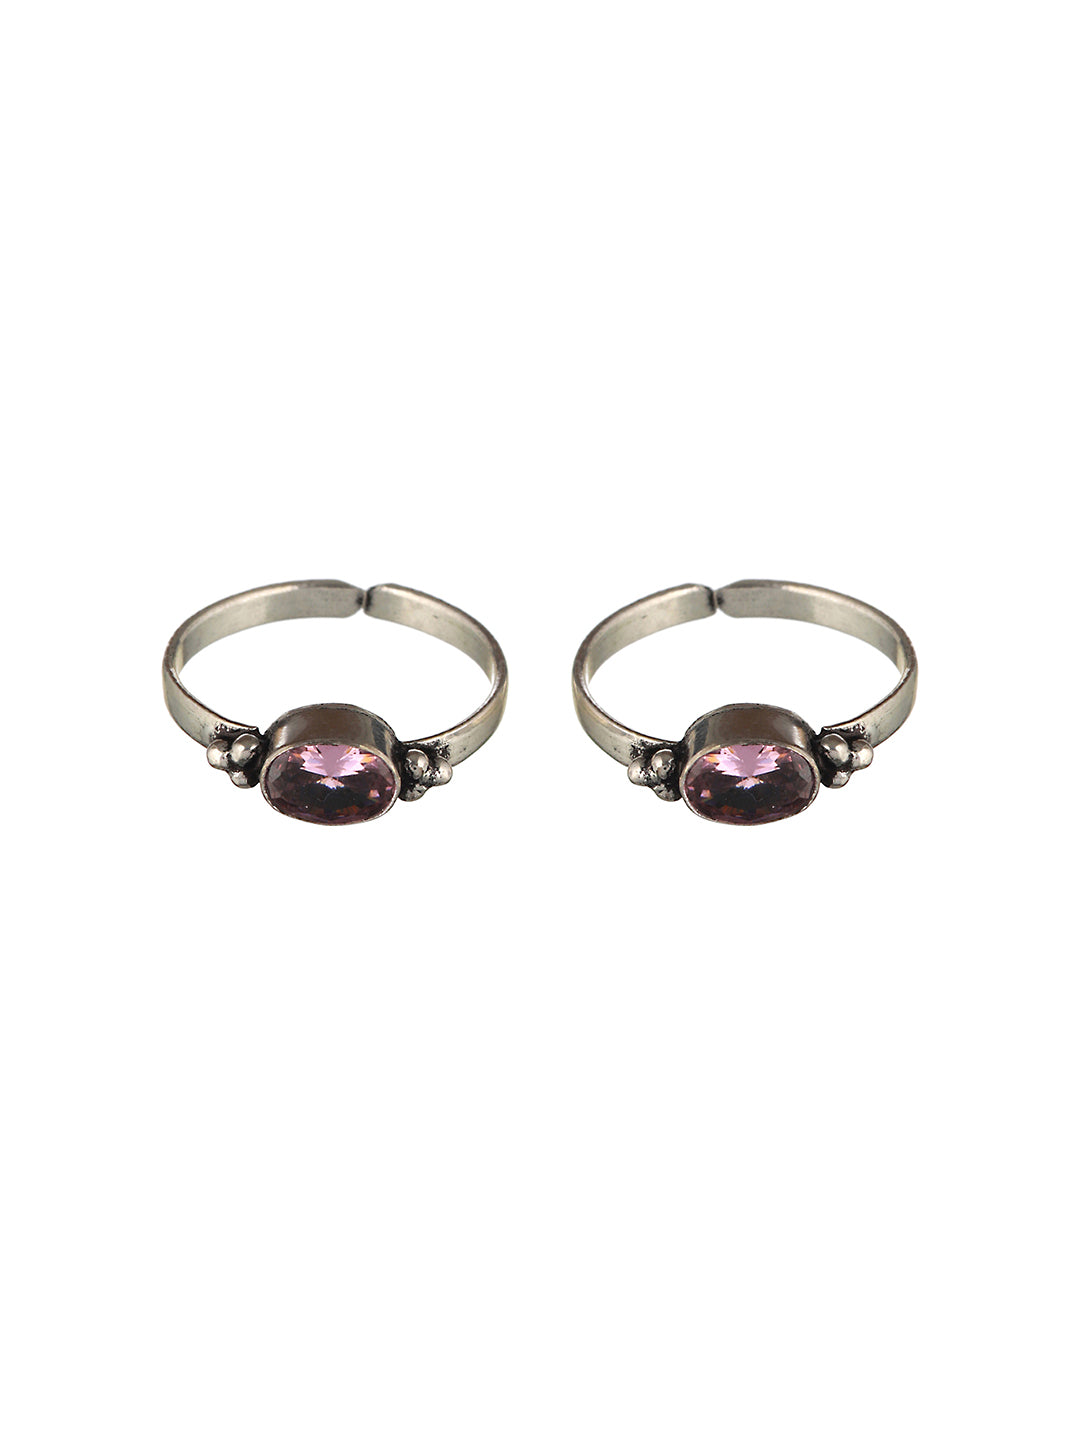 Set Of 2 Silver Plated Pink AD Studded Delicate  Adjustable Toe Ring, zaveri pearls, sale price rs, sale price, sale gold plated, sale gold, sale, rubans, ring, regular price, priyassi jewell